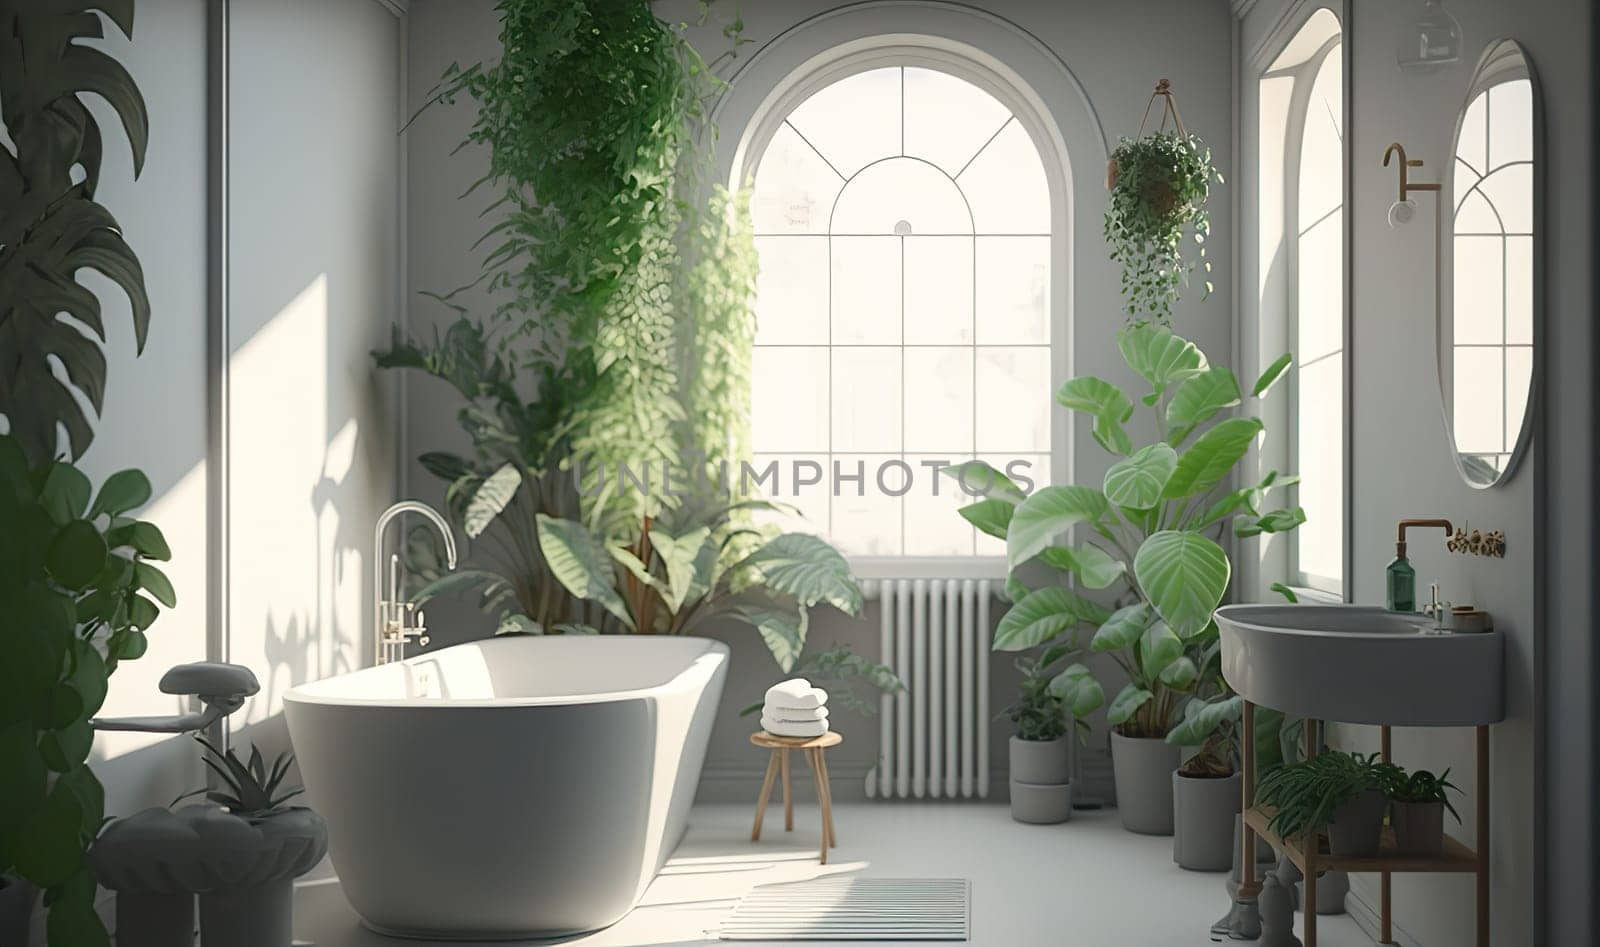 Soft native organic shapes look of bathroom with big window oval bathtub with lights and Green palm plants in selfcare wellness luxury living by Jyliana